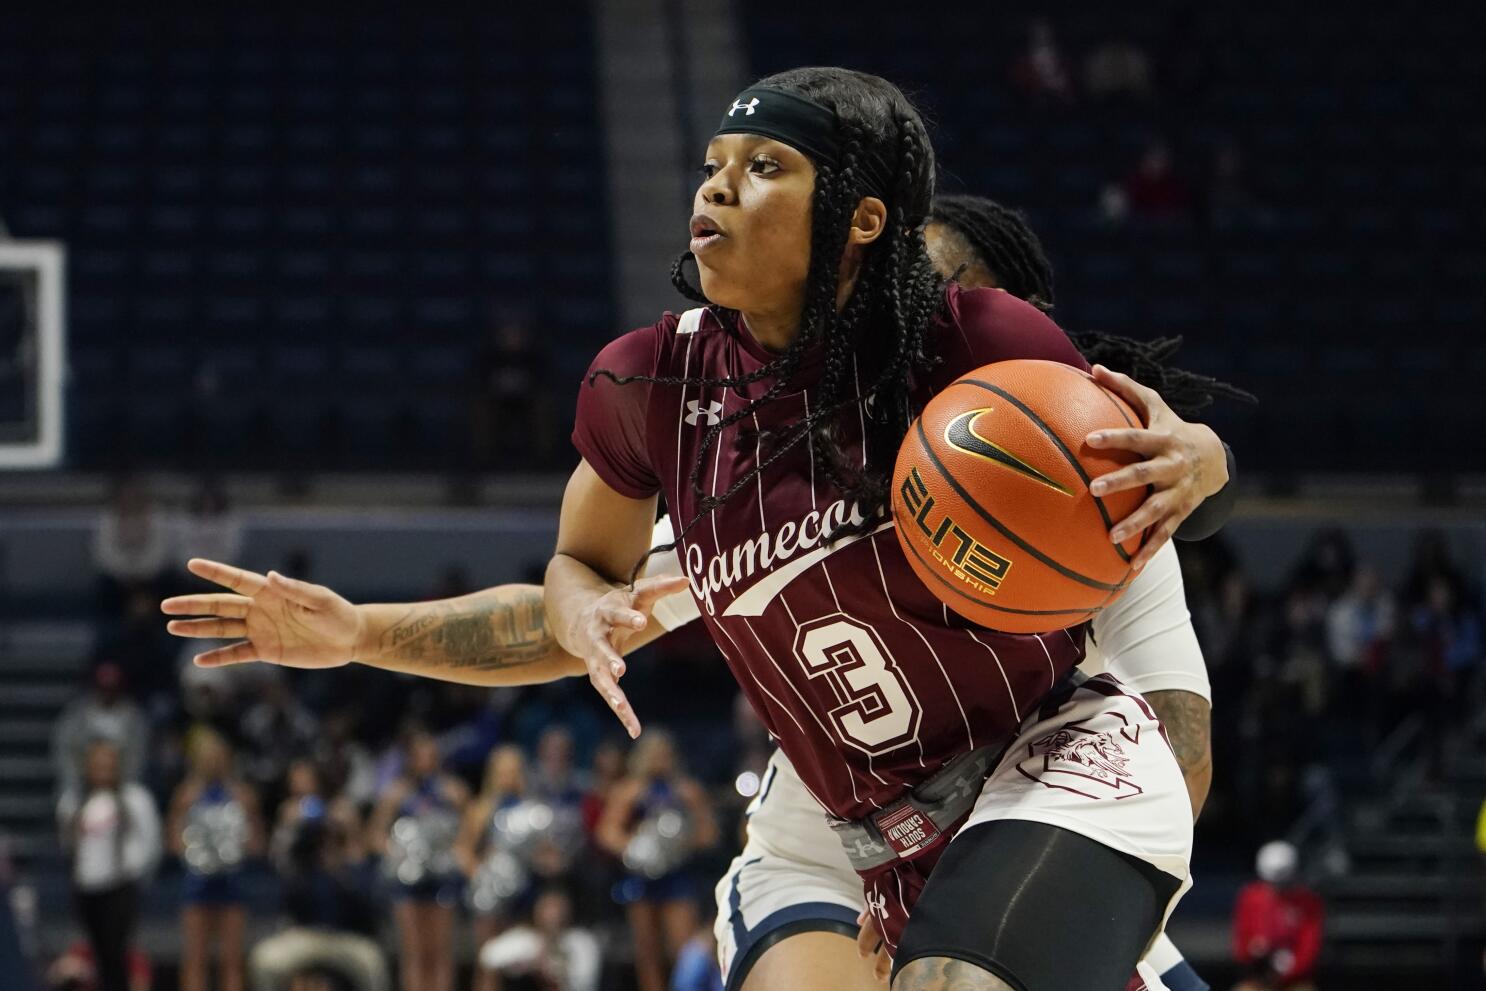 Next up on Staley, Gamecocks' to-do list: SEC tourney title - The Sumter  Item